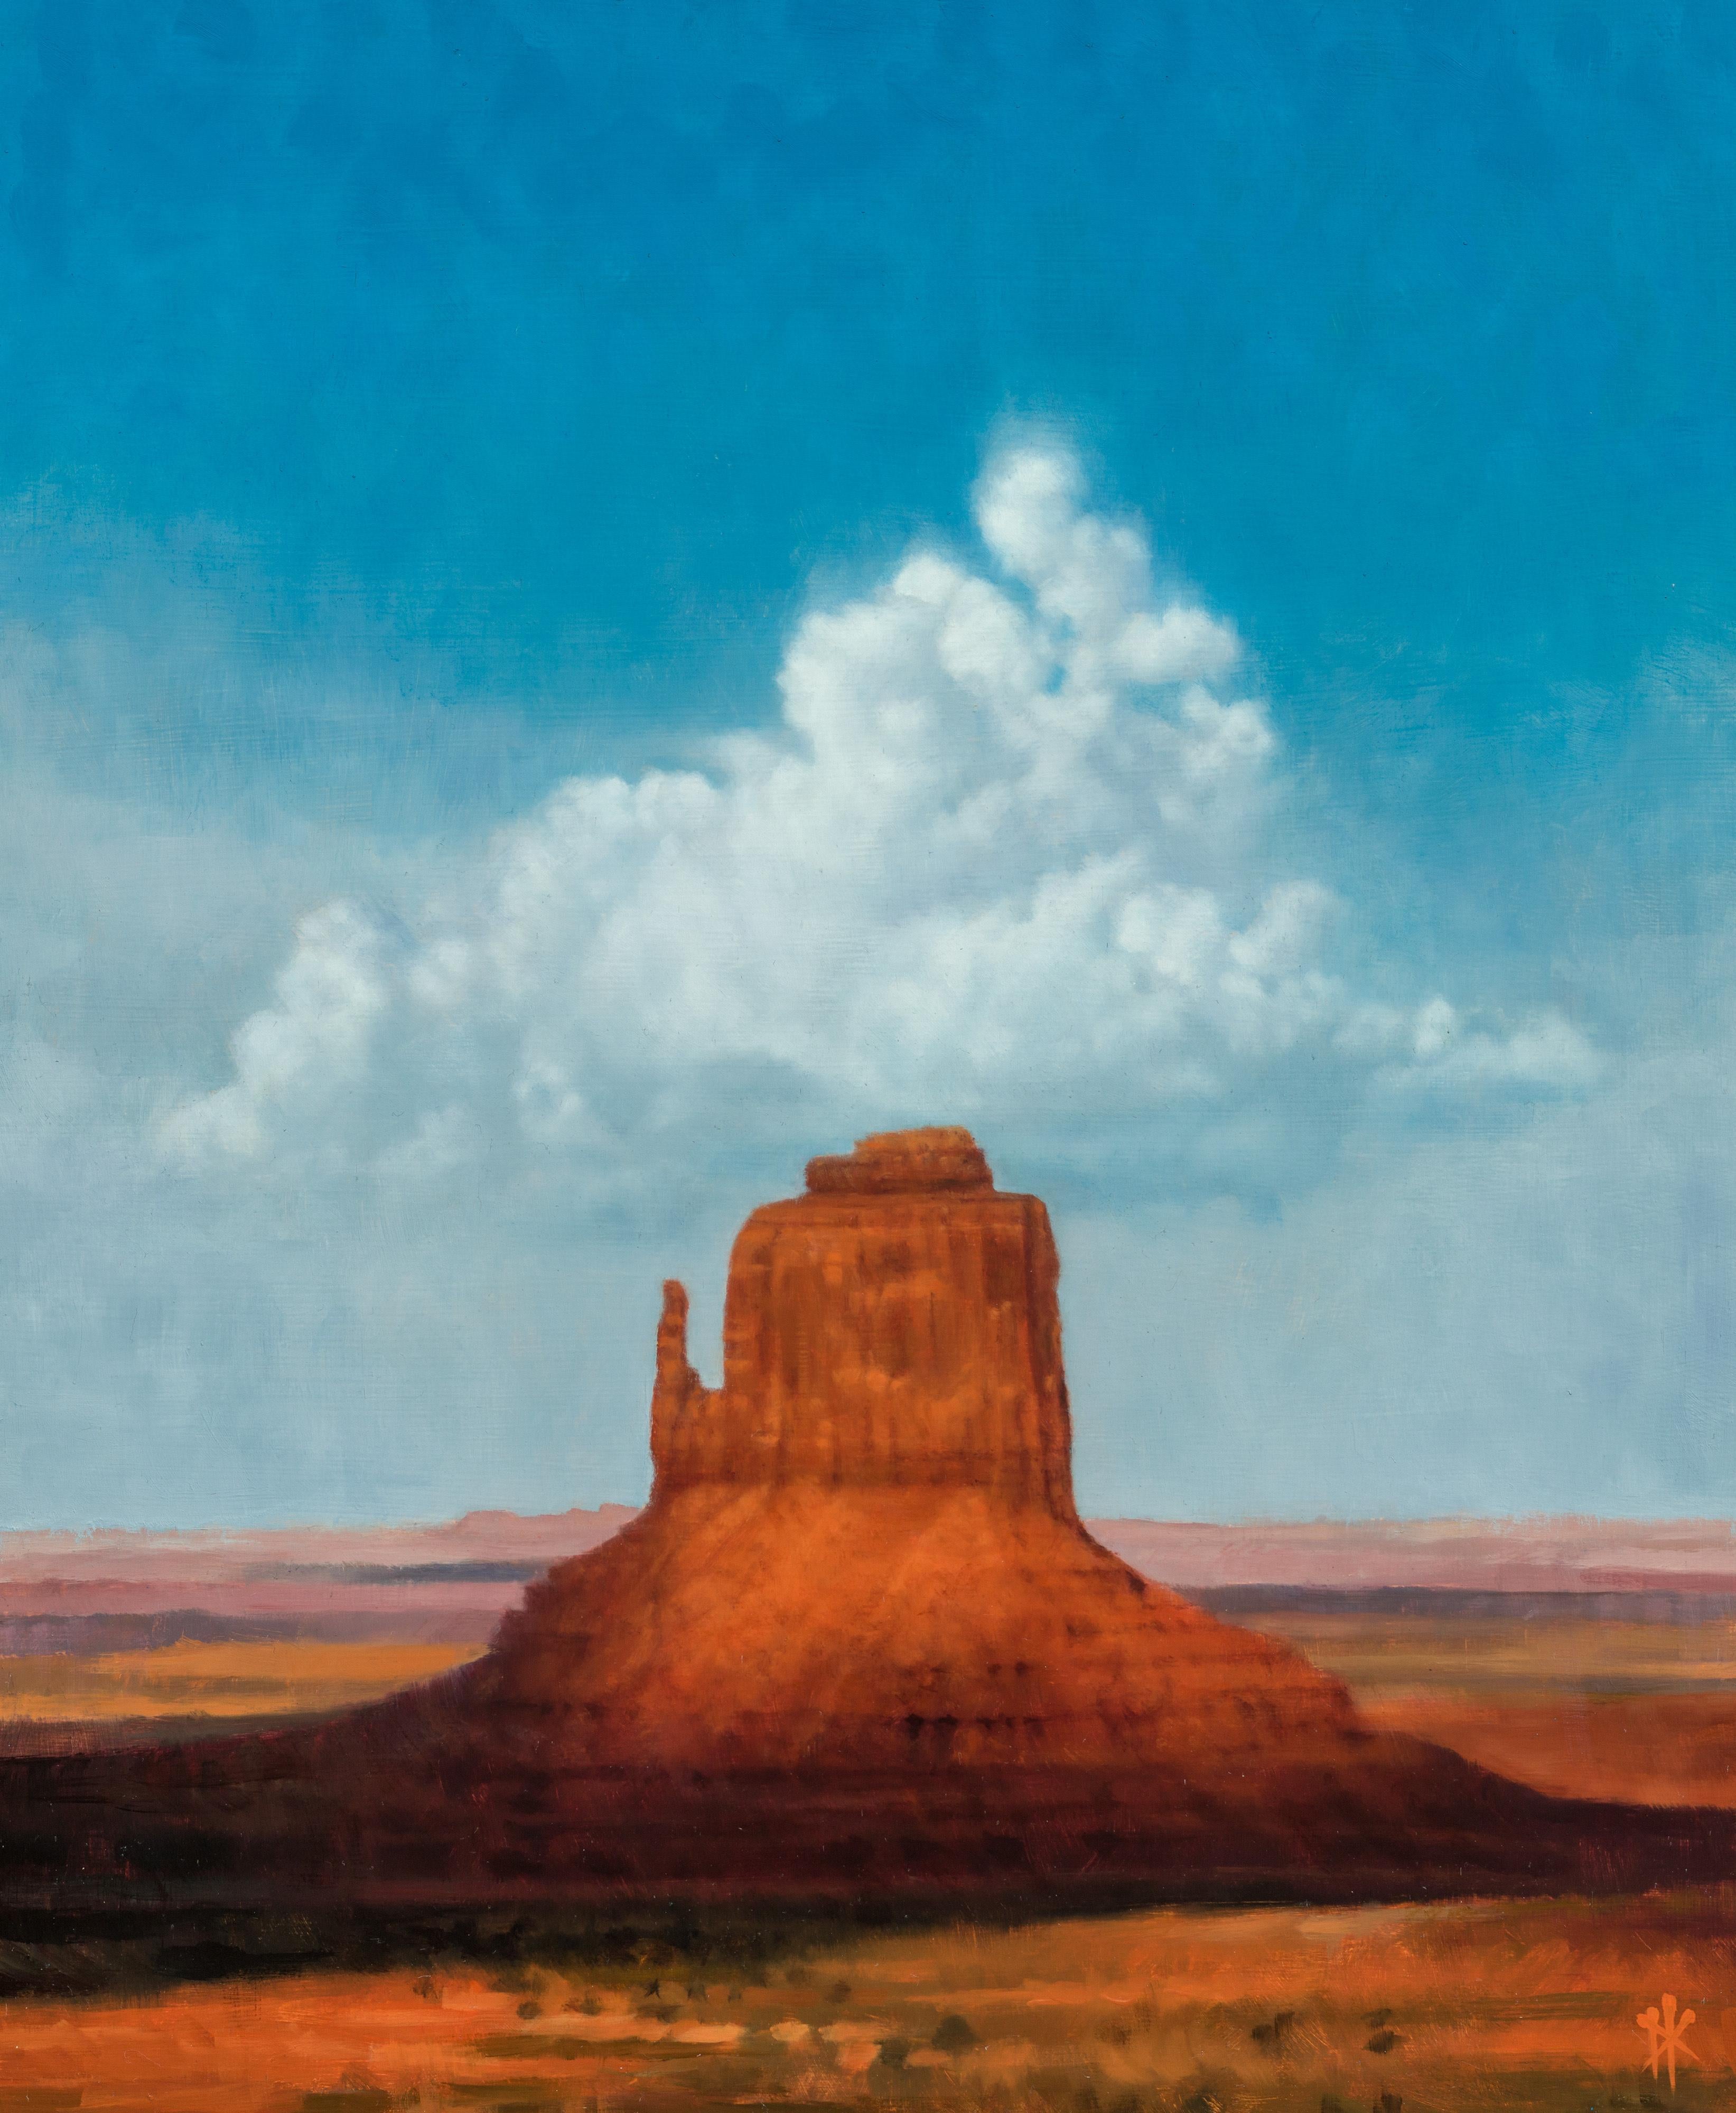 Patrick Kramer Figurative Painting - "Heaven and Earth (Monument Valley)" Oil Painting